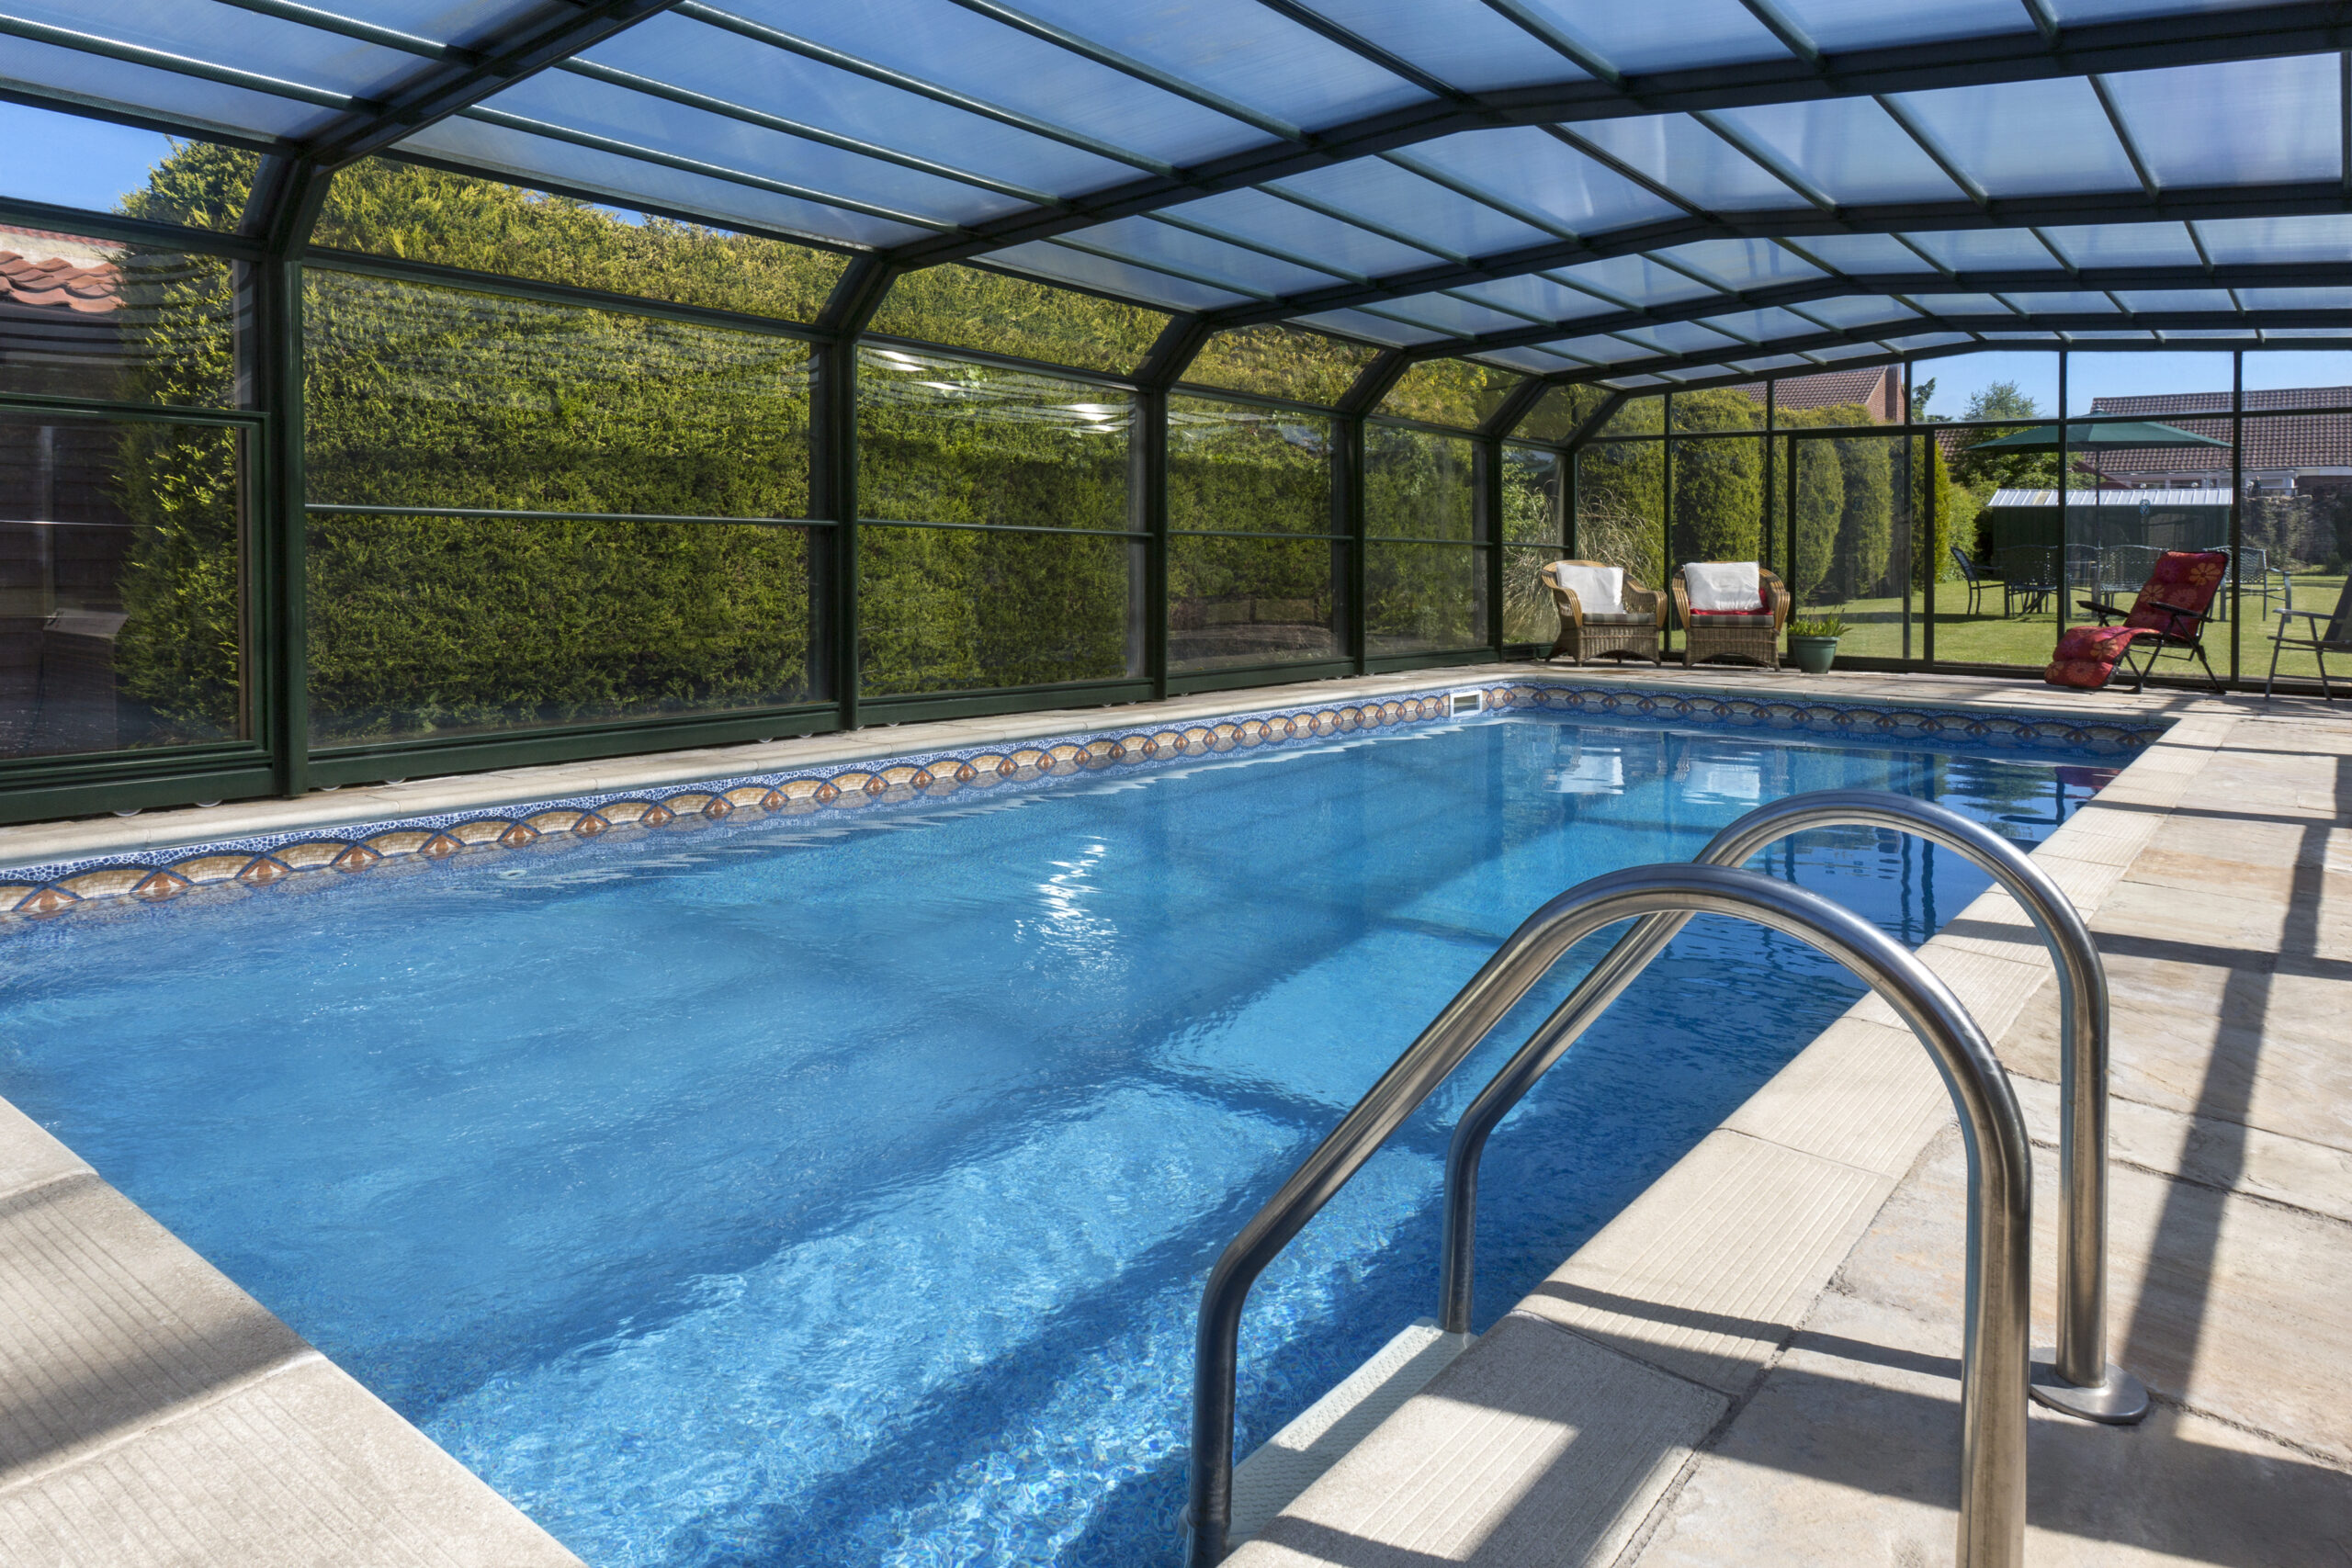 A soundproof pool enclosure, designed to minimize noise transmission in and out of the pool area, providing a quiet and serene environment for relaxation and enjoyment.